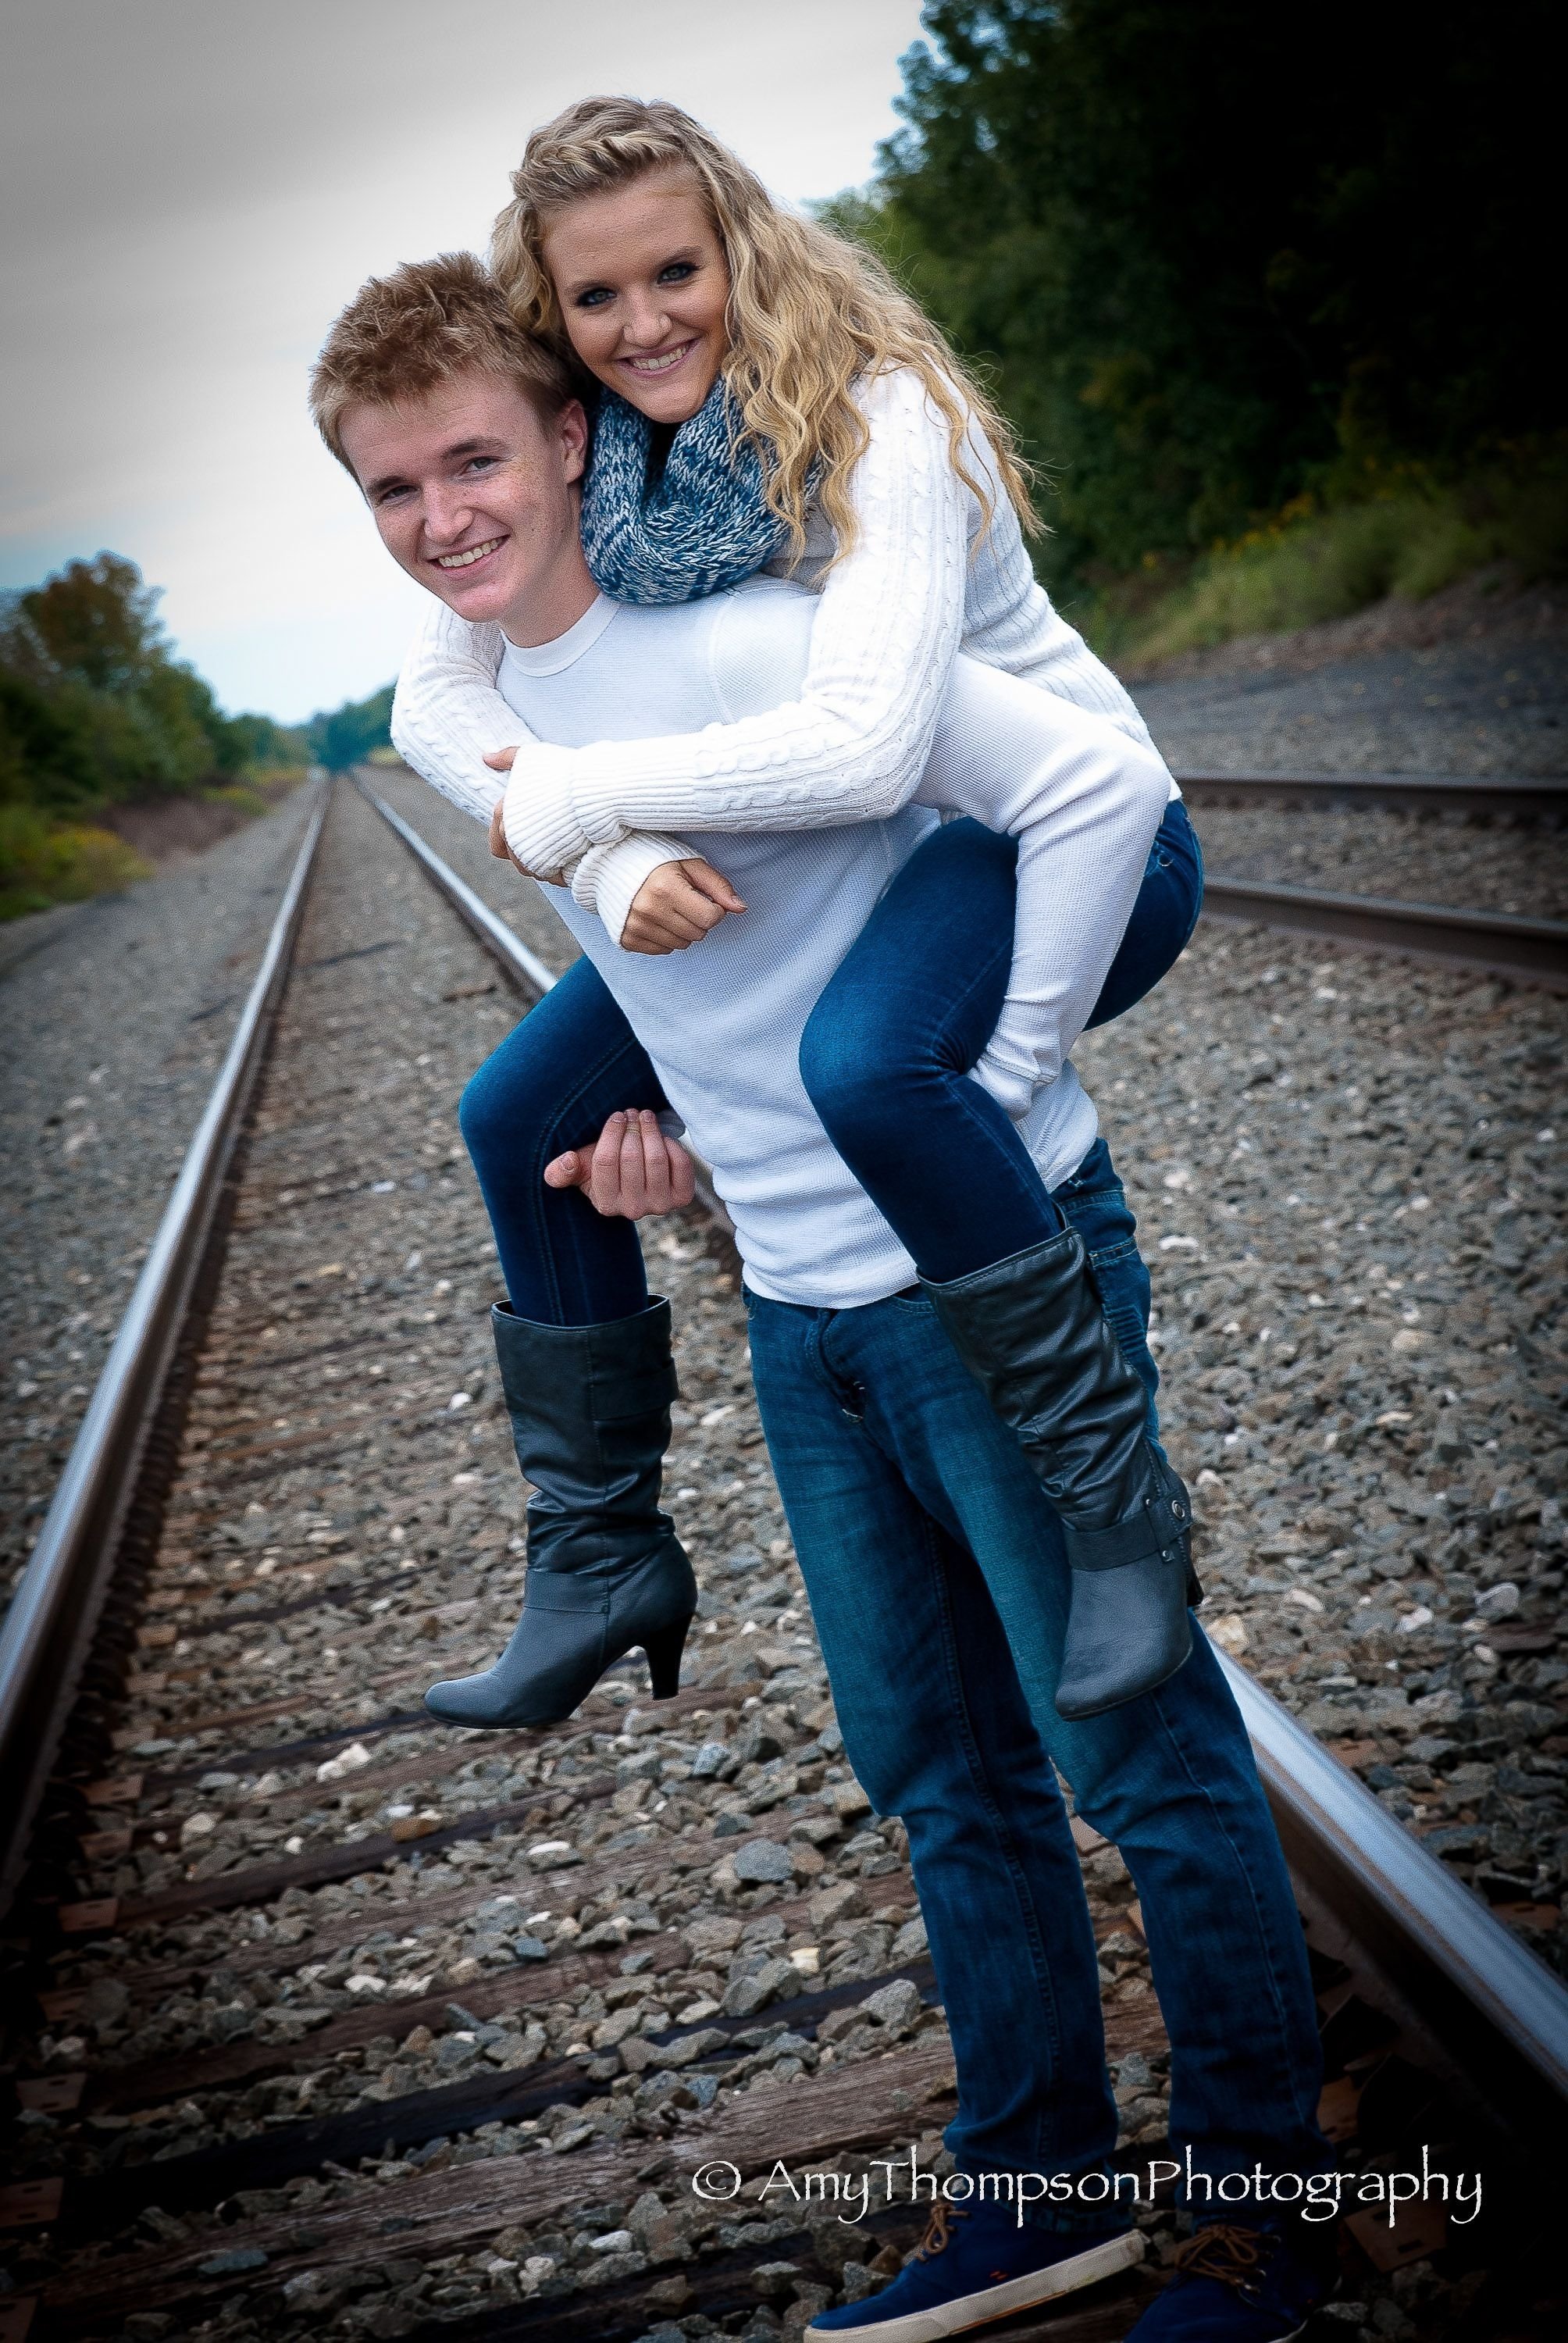 10 Amazing Brother And Sister Picture Ideas twins senior pictures twins brother and sister best friends 2022